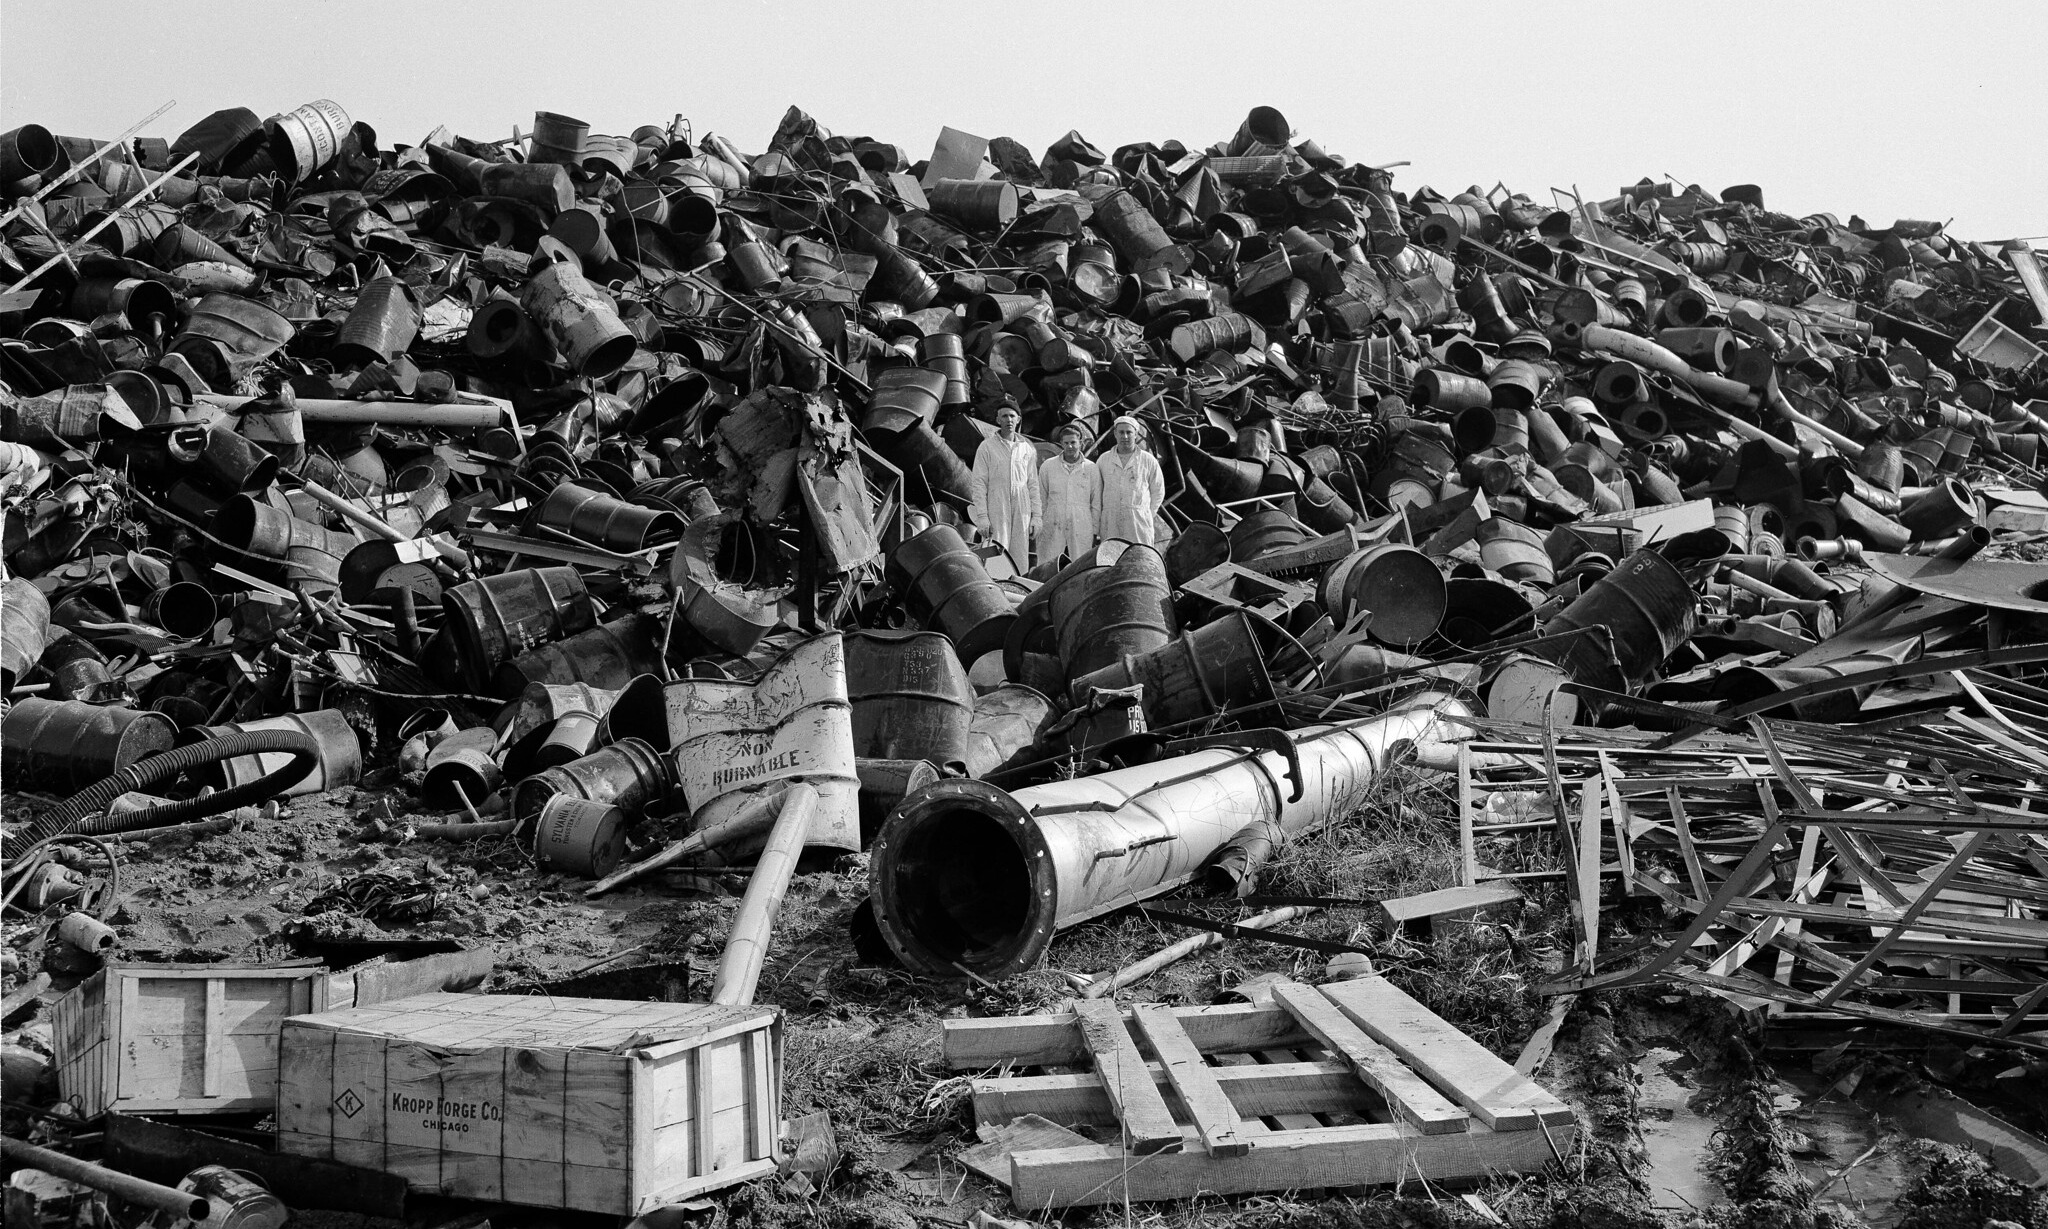 Three production workers stand in a scrap pile at the Feed Materials Production Center, January 5, 1956. Courtesy of the U.S. Department of Energy, flickr.com.